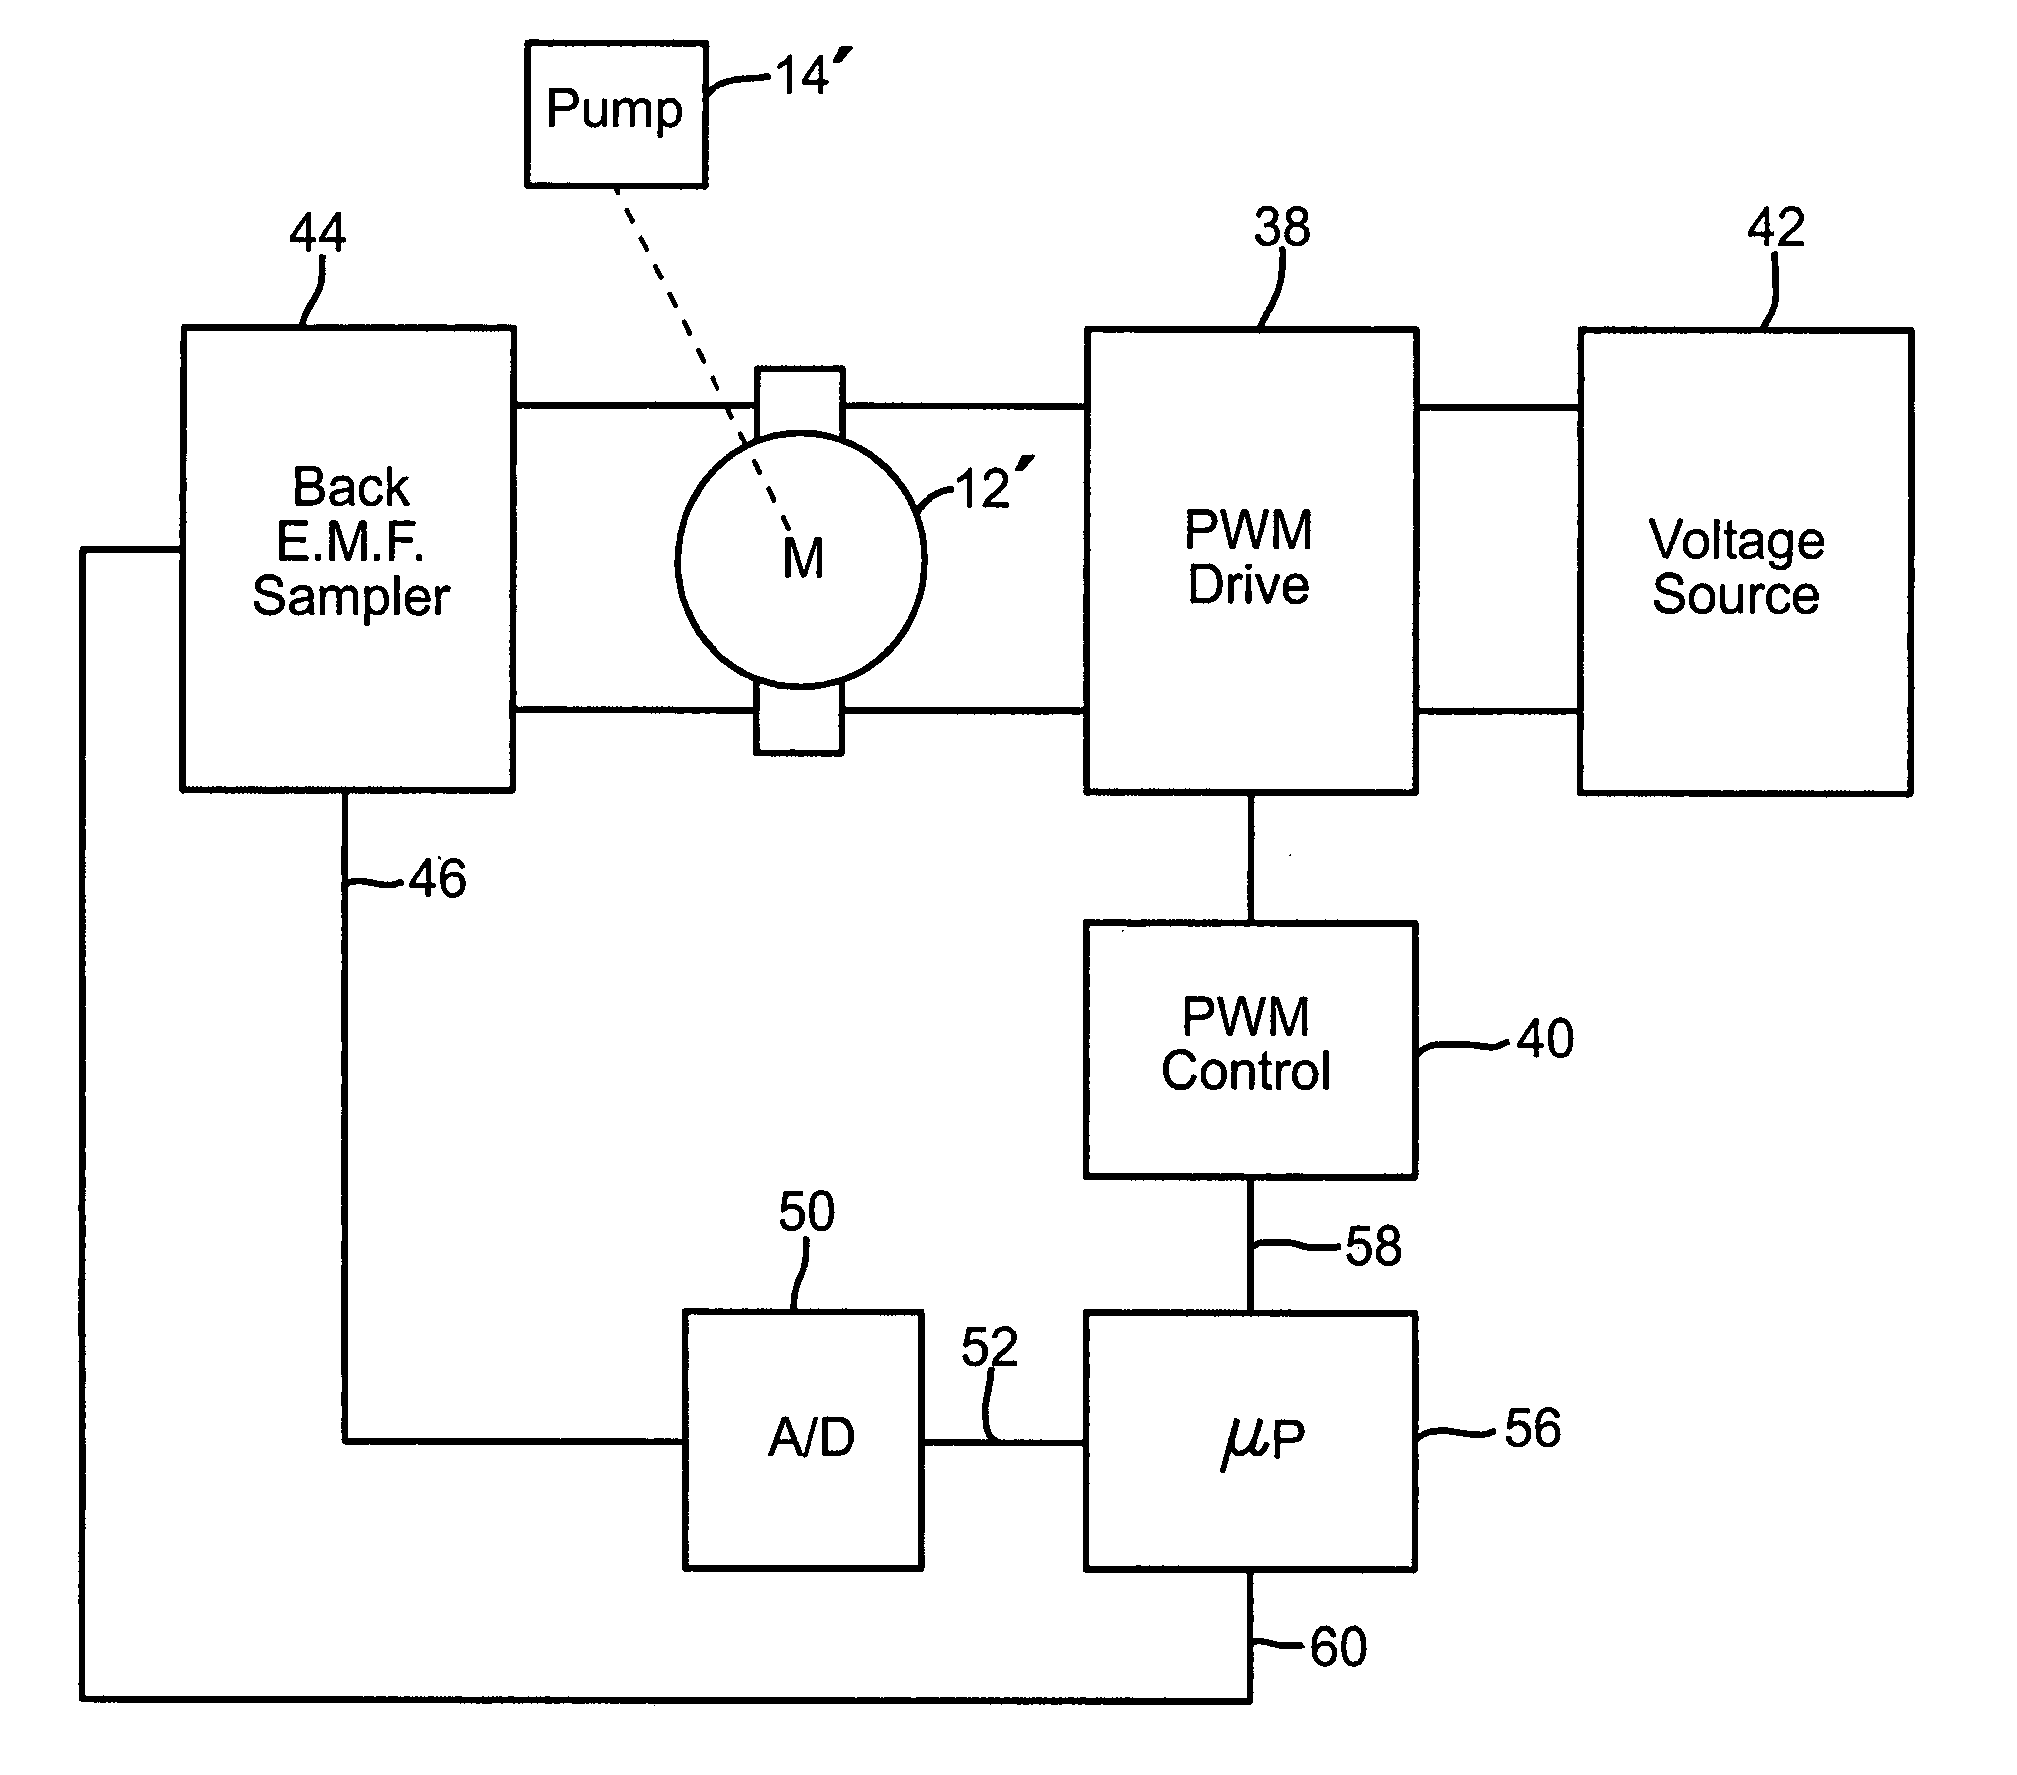 Speed and fluid flow controller